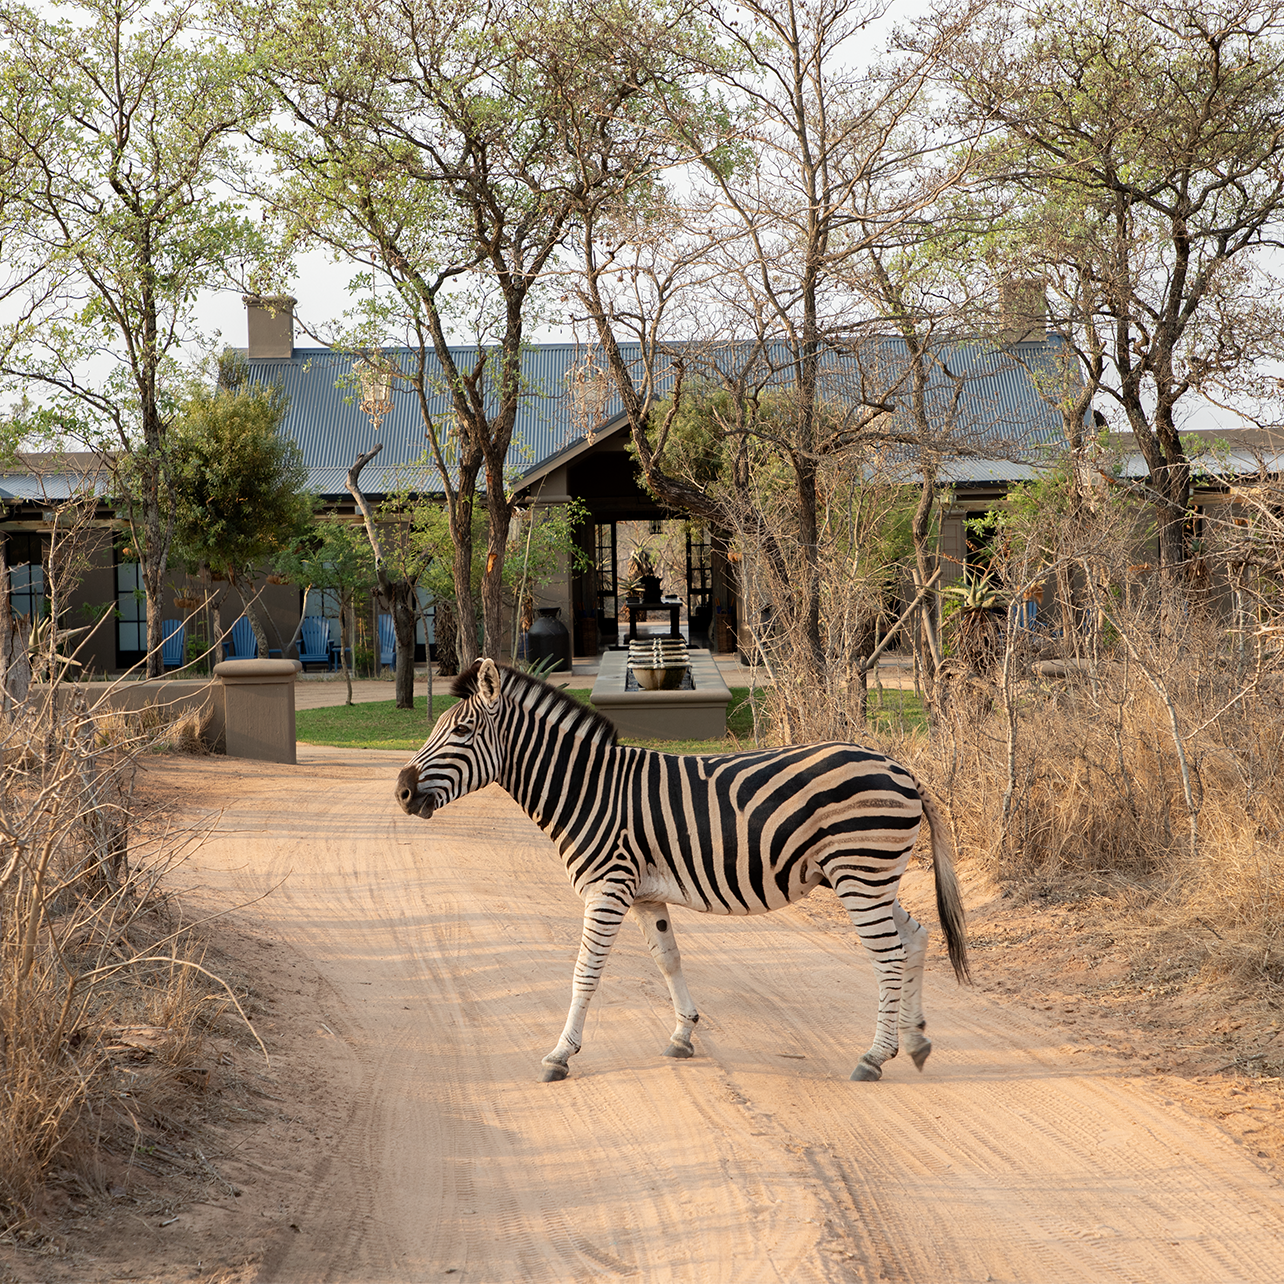 Zebra photographed in front of a house